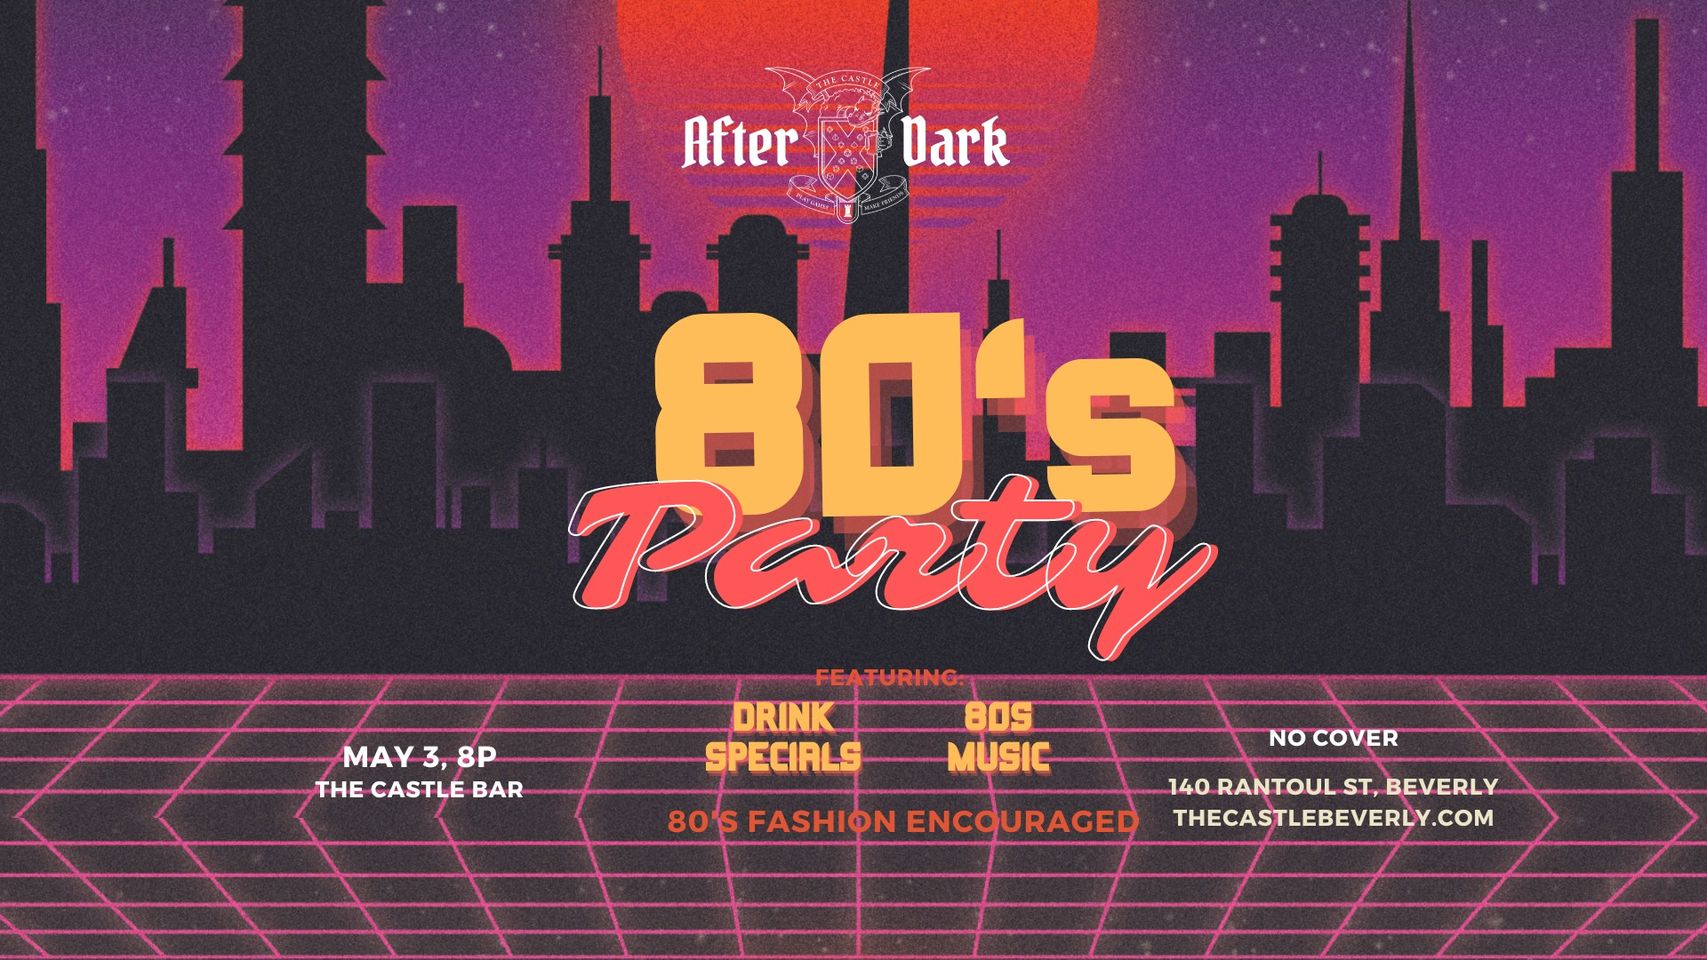 Join the ultimate 80's party named "After Dark" at Castle Bar. We're rolling back the clock with awesome drink deals, nostalgic 80's tunes and retro fashion. Don't miss out on this blast from the past!